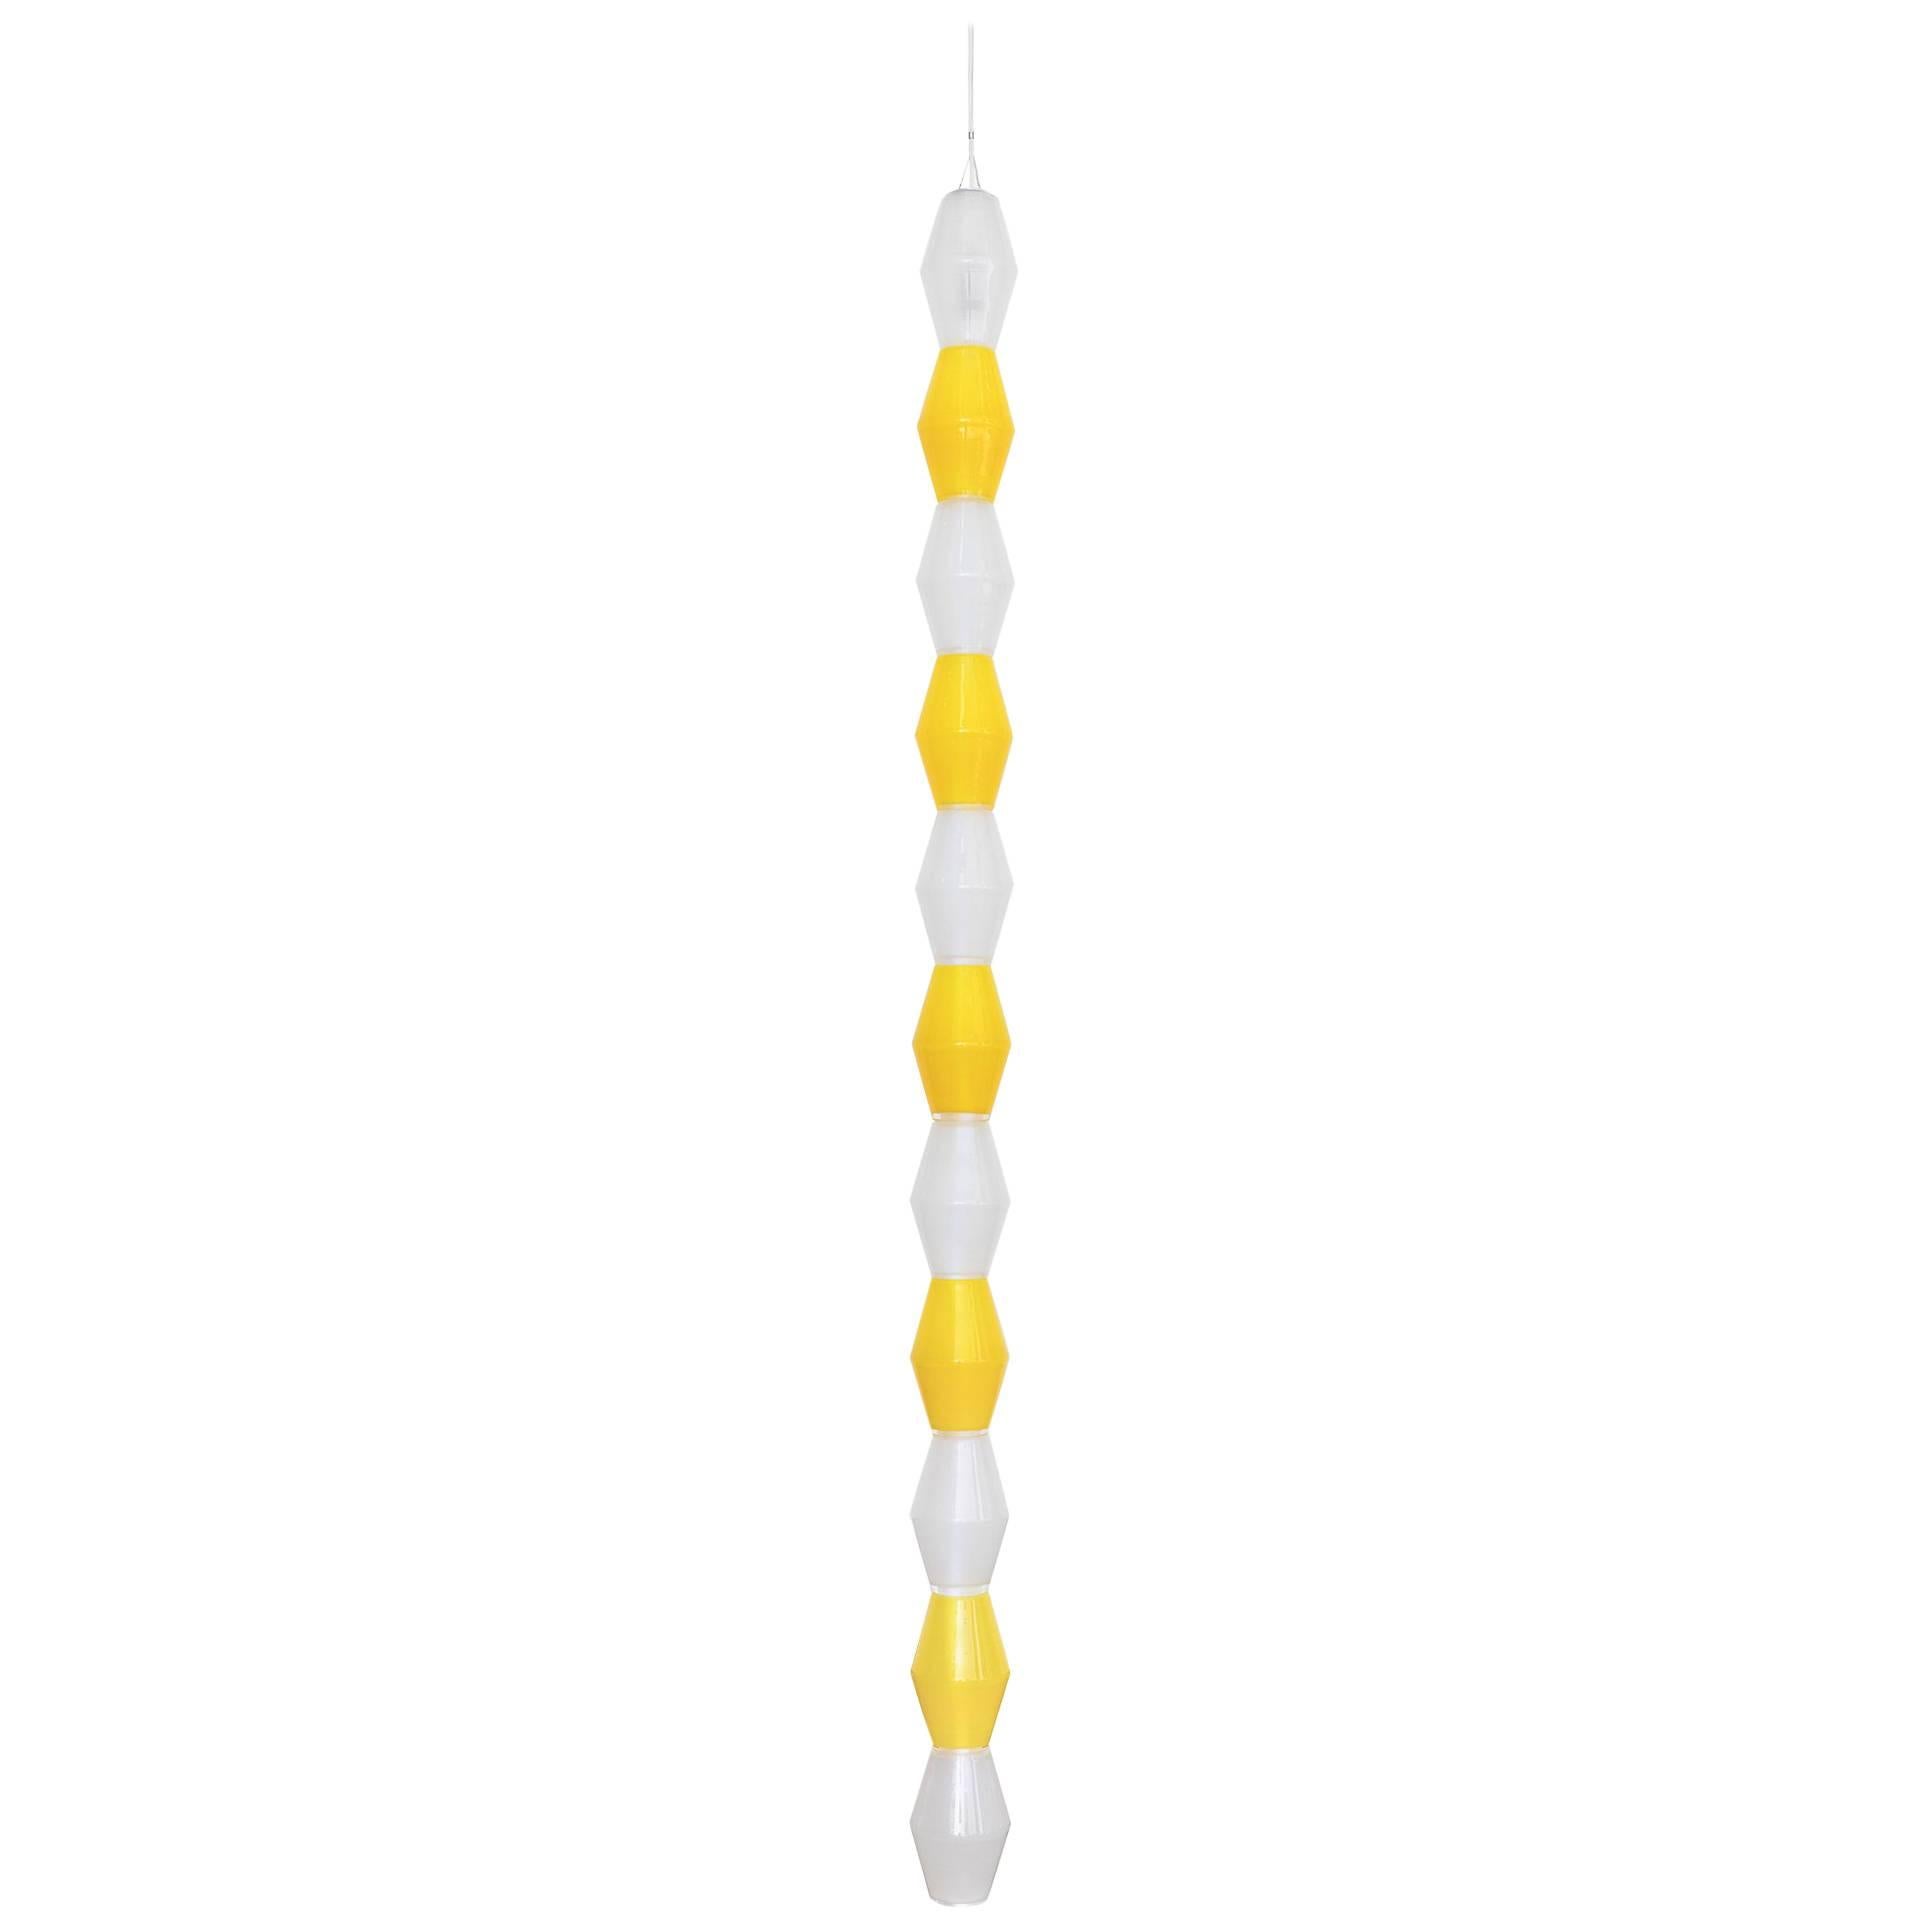 Large Sculptural Stacked Glass "Pearl Buoy" Hanging Light by Tron Meyer